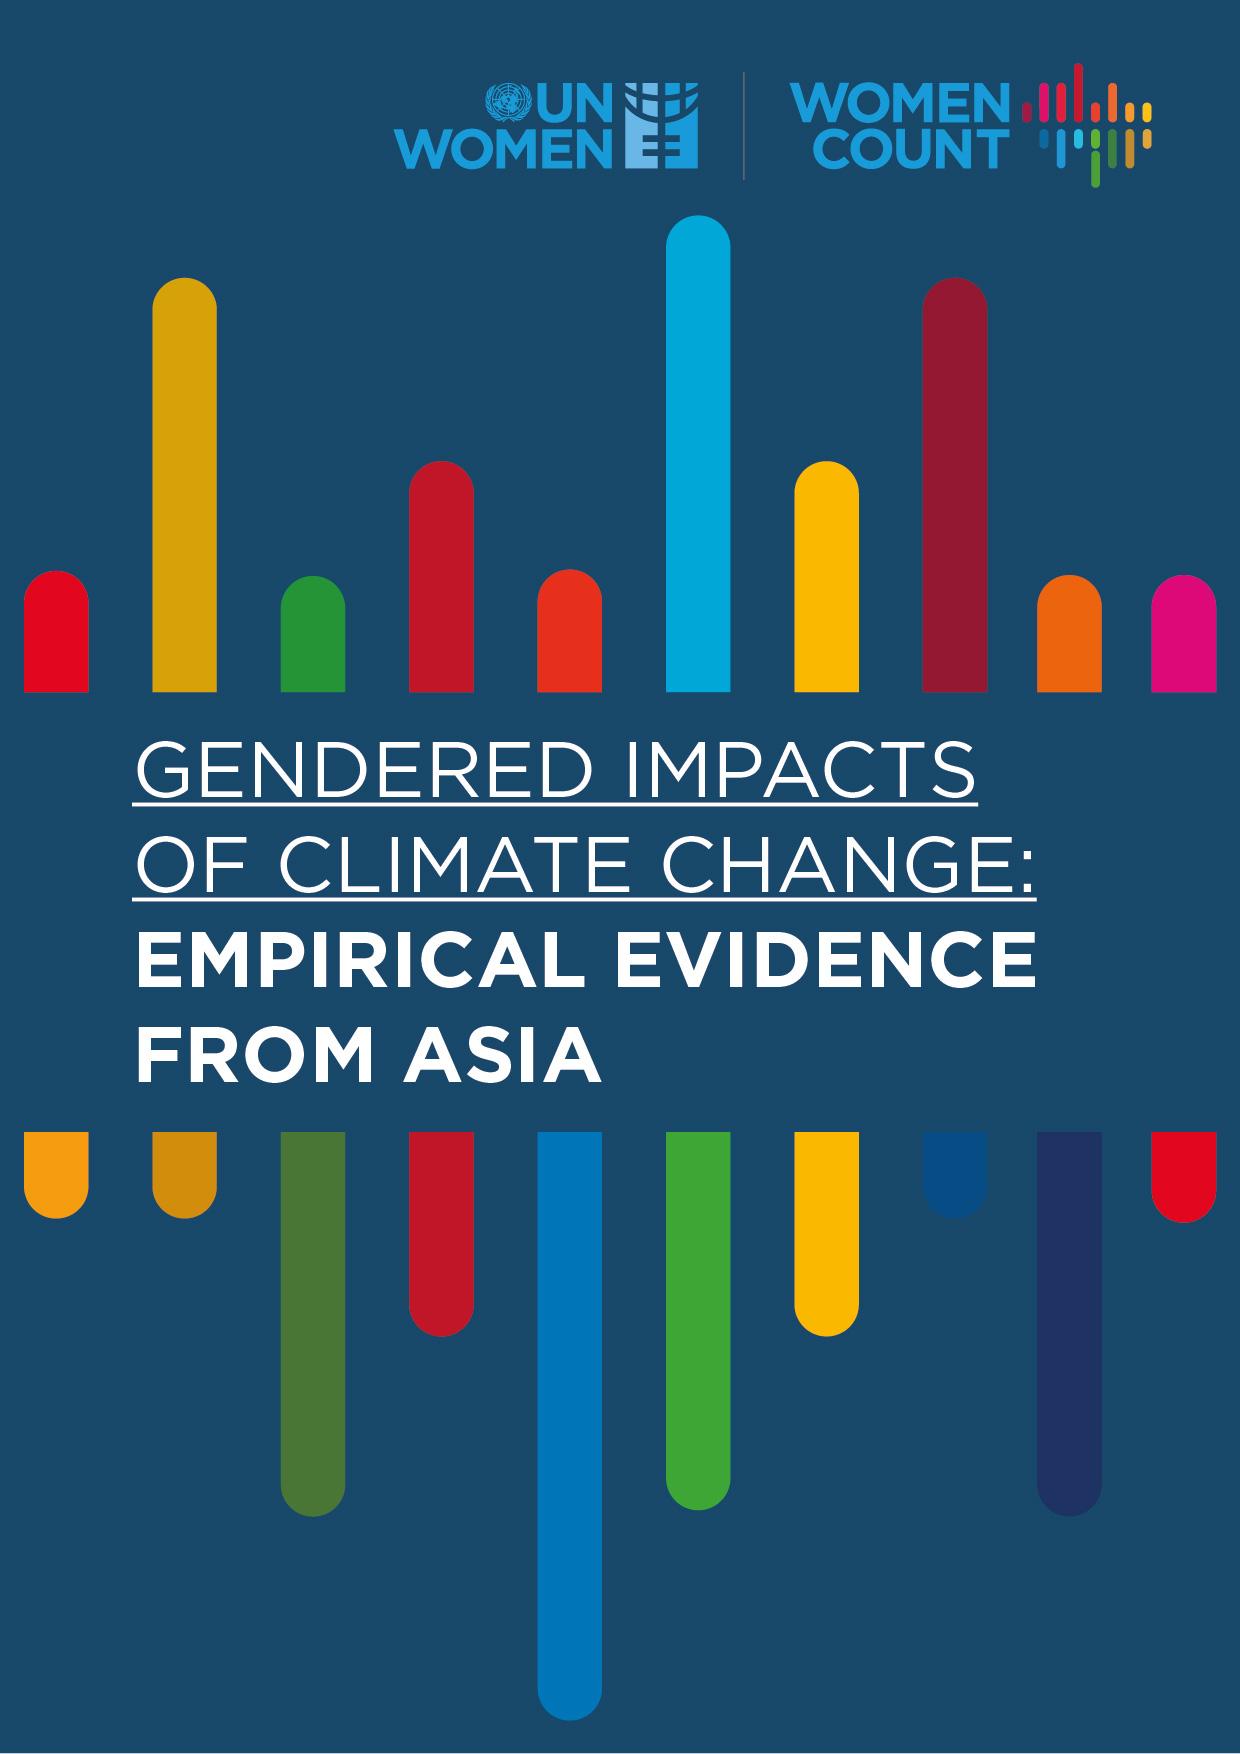 impact of climate change on gender in Asia and the Pacific